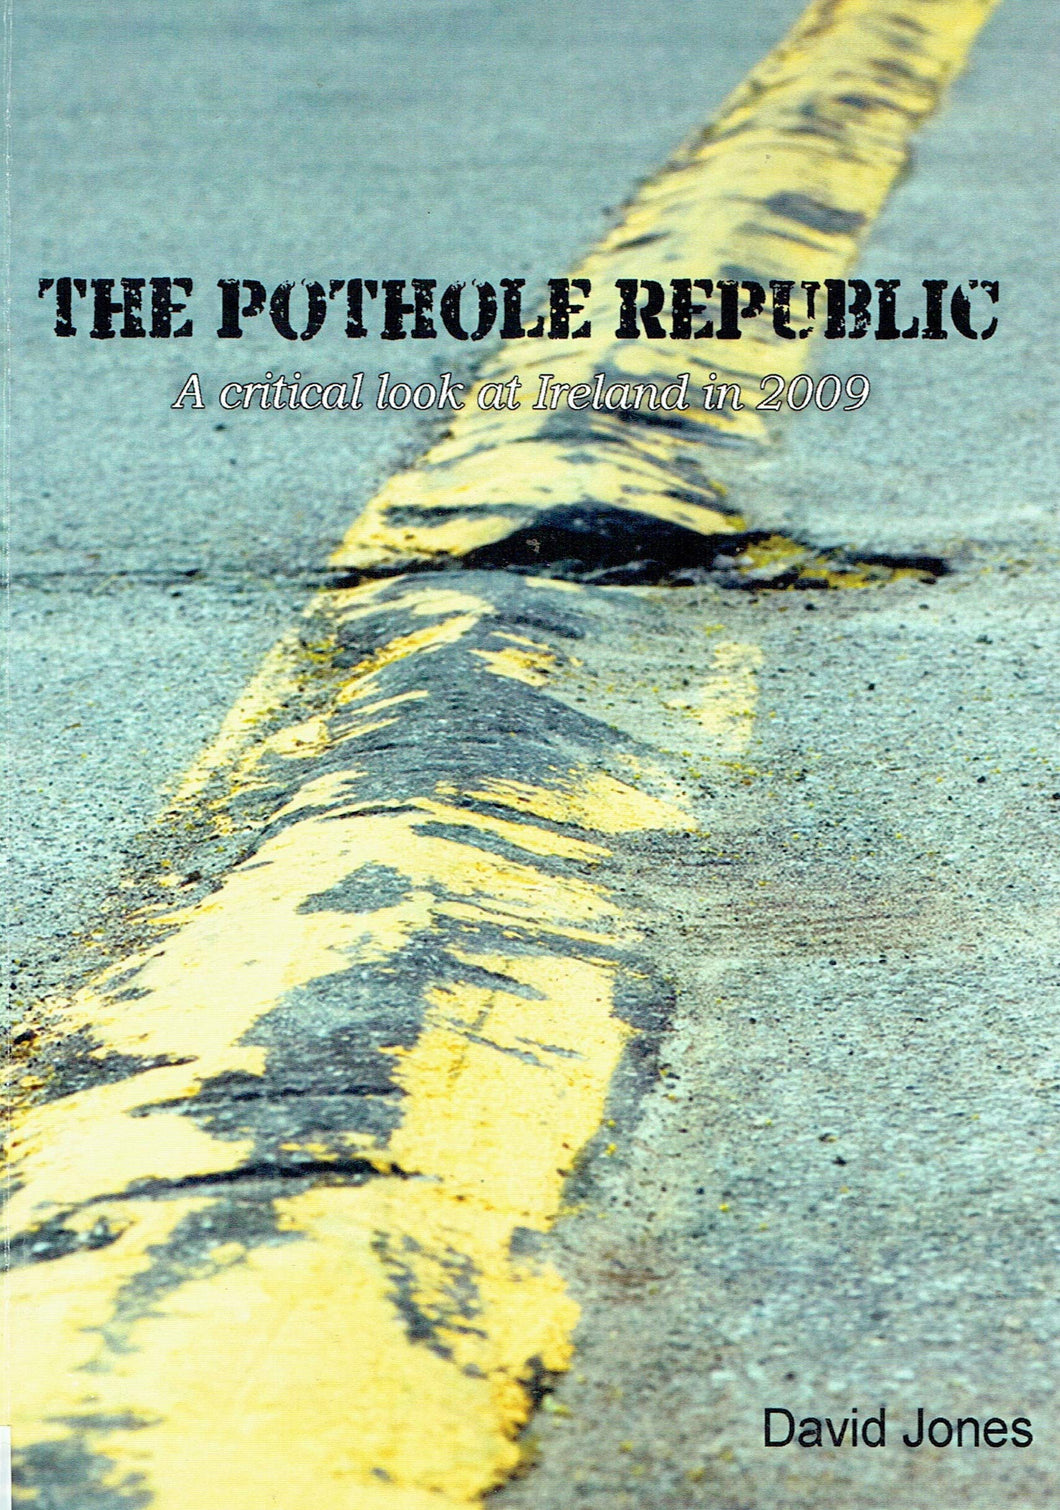 The Pothole Republic: A Critical Look at Ireland in 2009